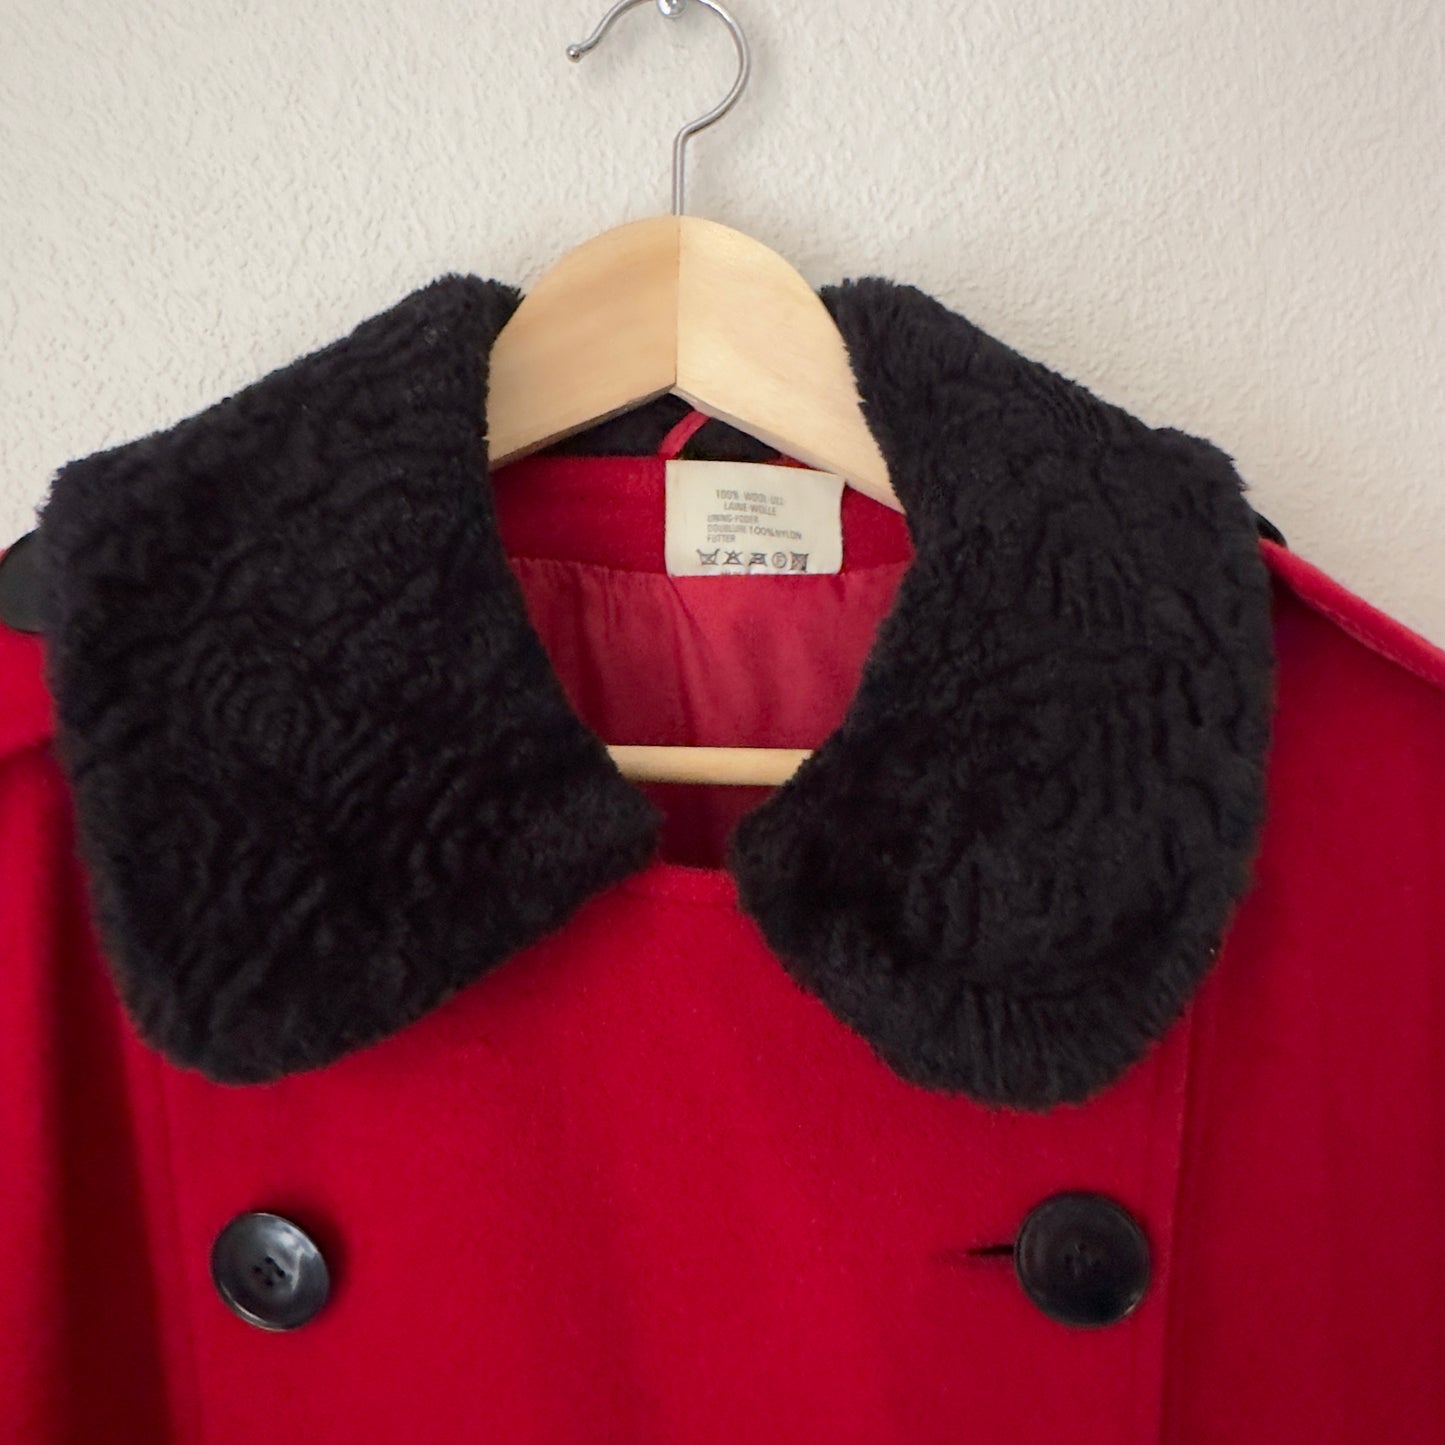 Vintage Double-breasted Red Wool Coat